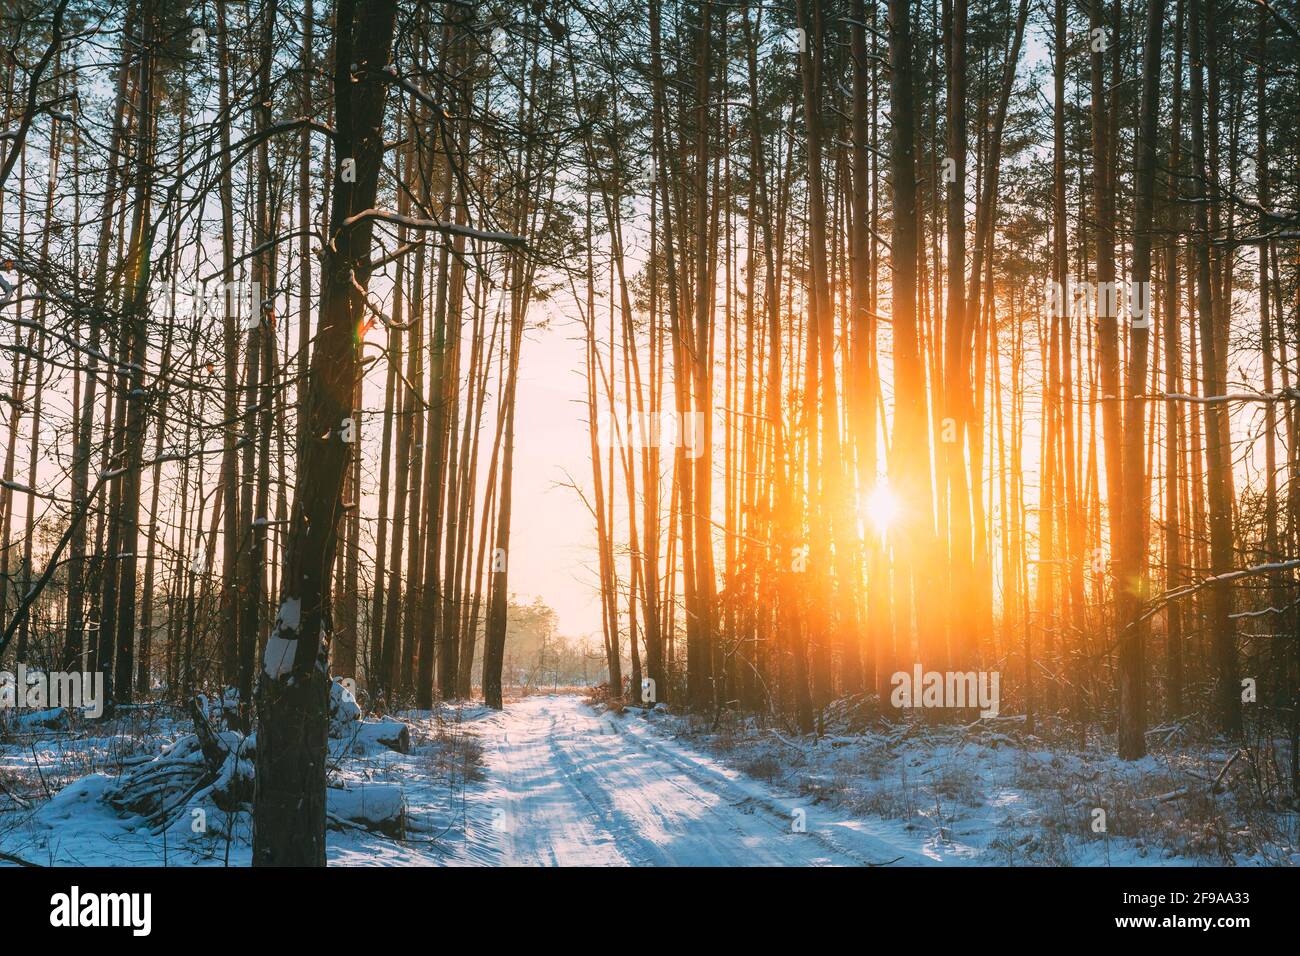 Country Road In Winter Pine Forest. Sun Sunshine Sunlight Through Frosted Trees Frozen Trunks Woods In Winter Snowy Coniferous Forest Landscape Stock Photo